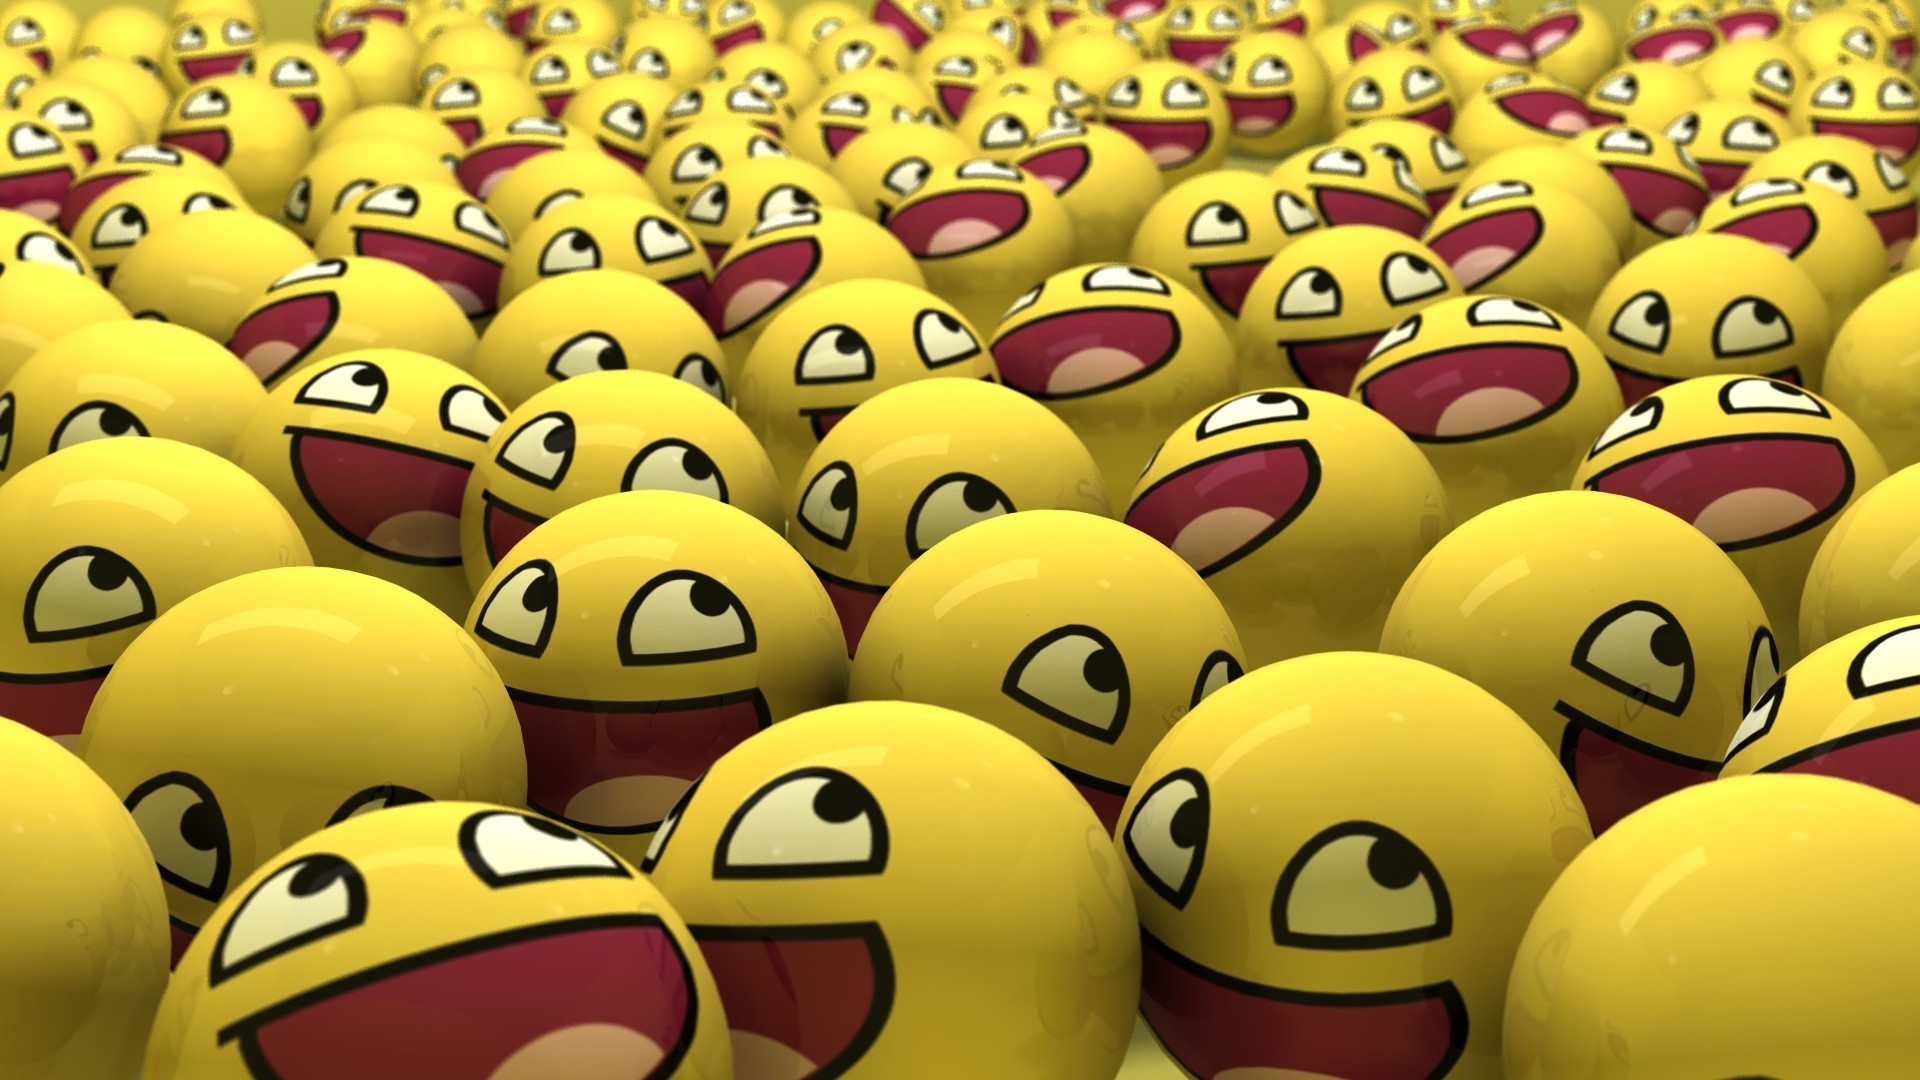 Emoji Wallpaper Notebook Â - Awesome Face Backgrounds - 1920x1080 Wallpaper  